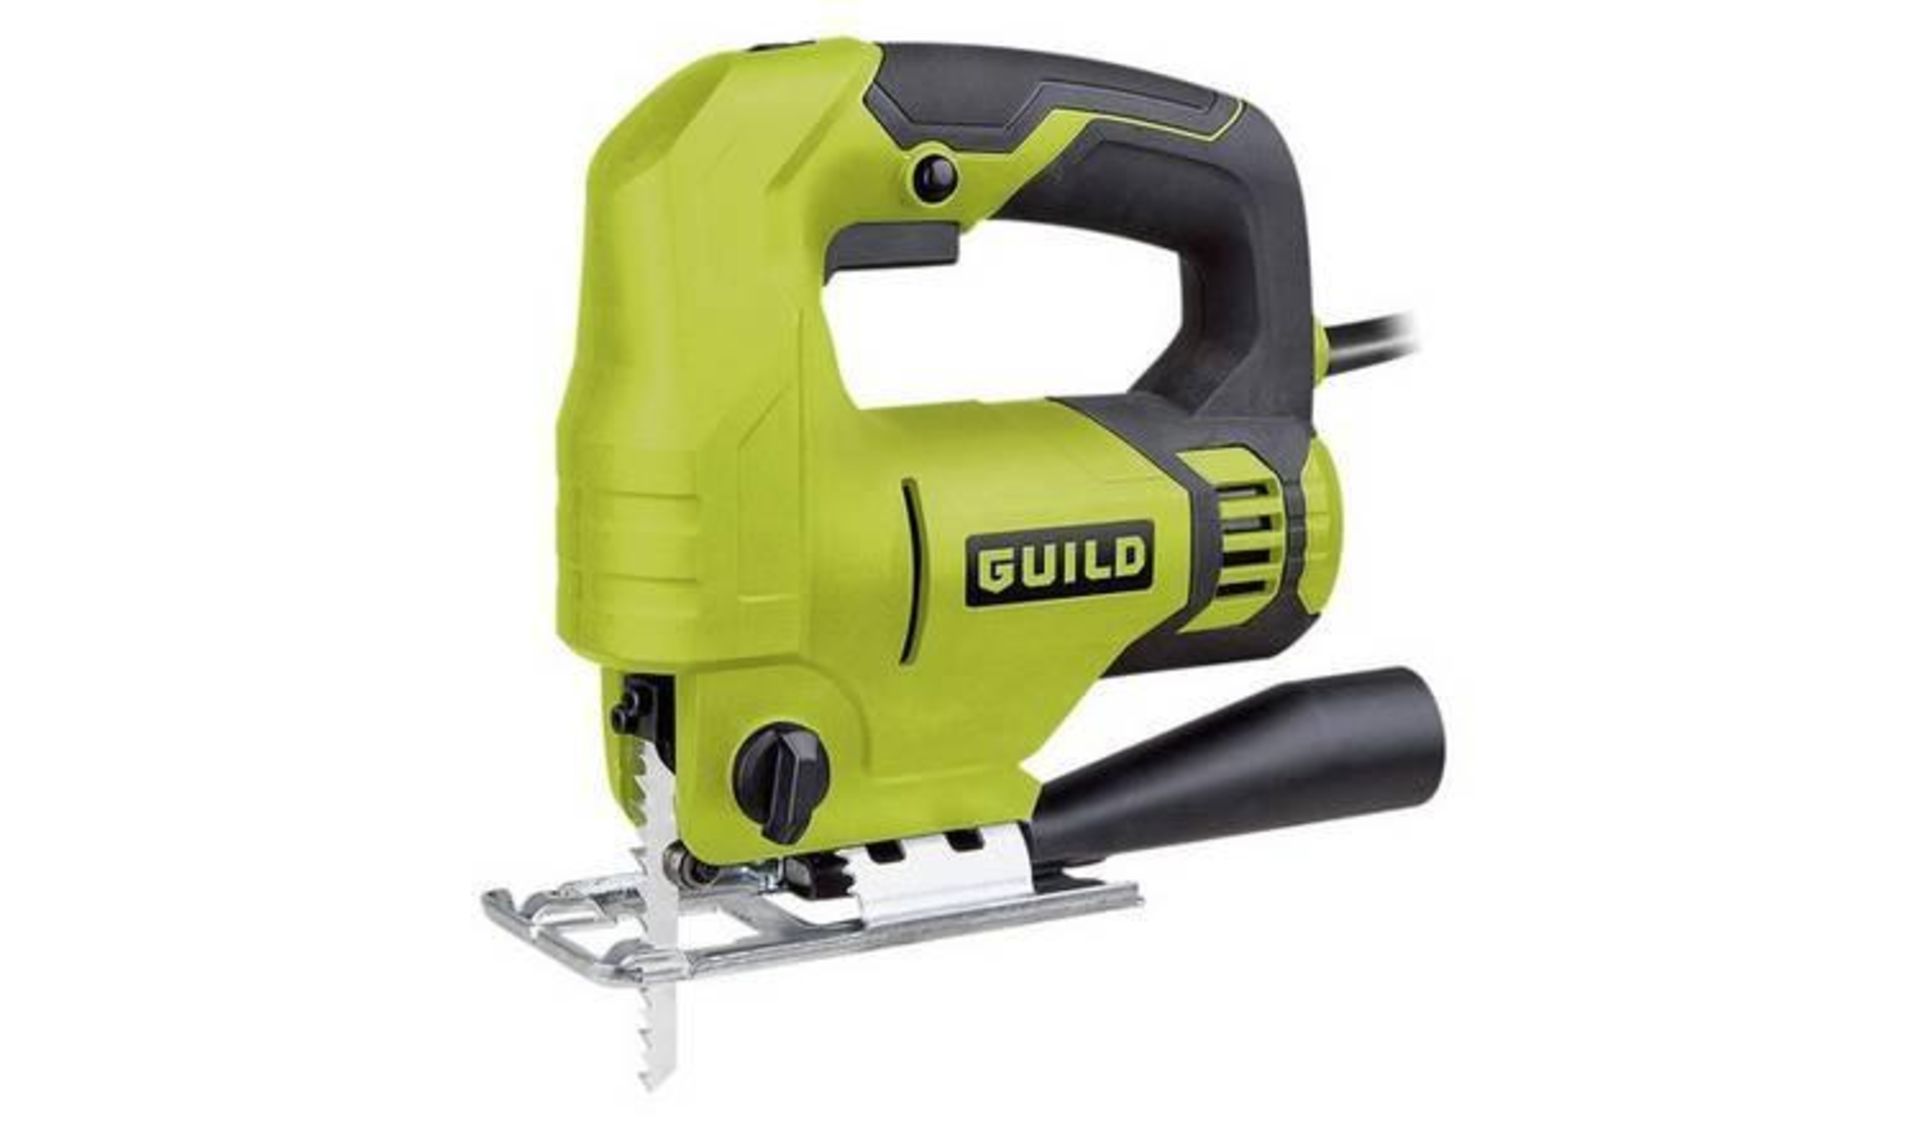 Guild Variable Speed Jigsaw - 710W 451/8392 £30.00 RRP